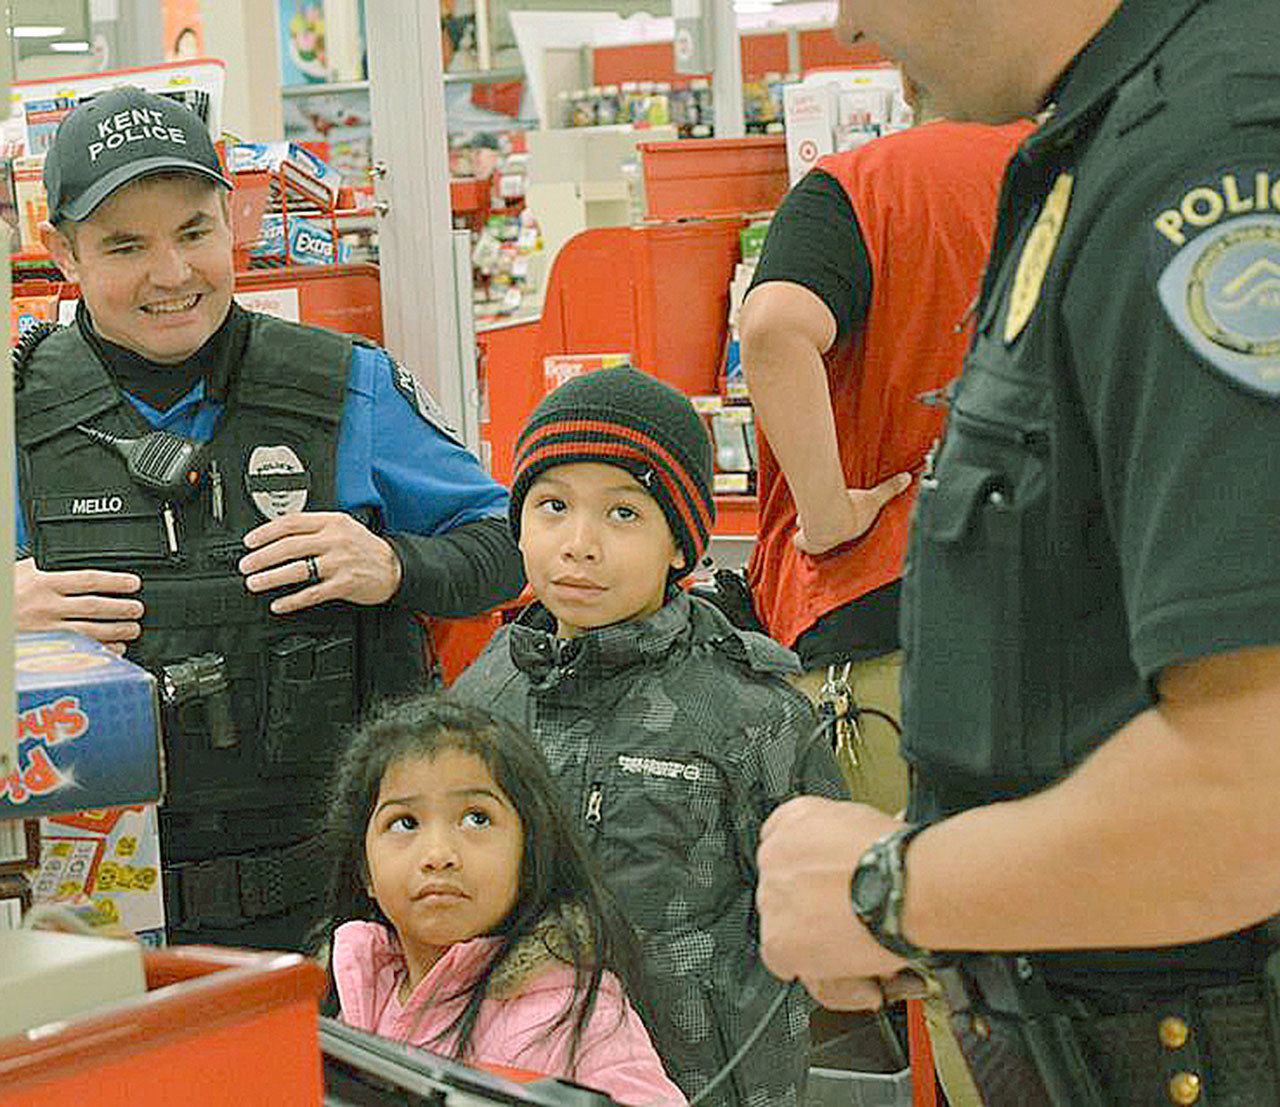 Kent Police officers help children shop for holiday gifts on Dec. 3 at Target.